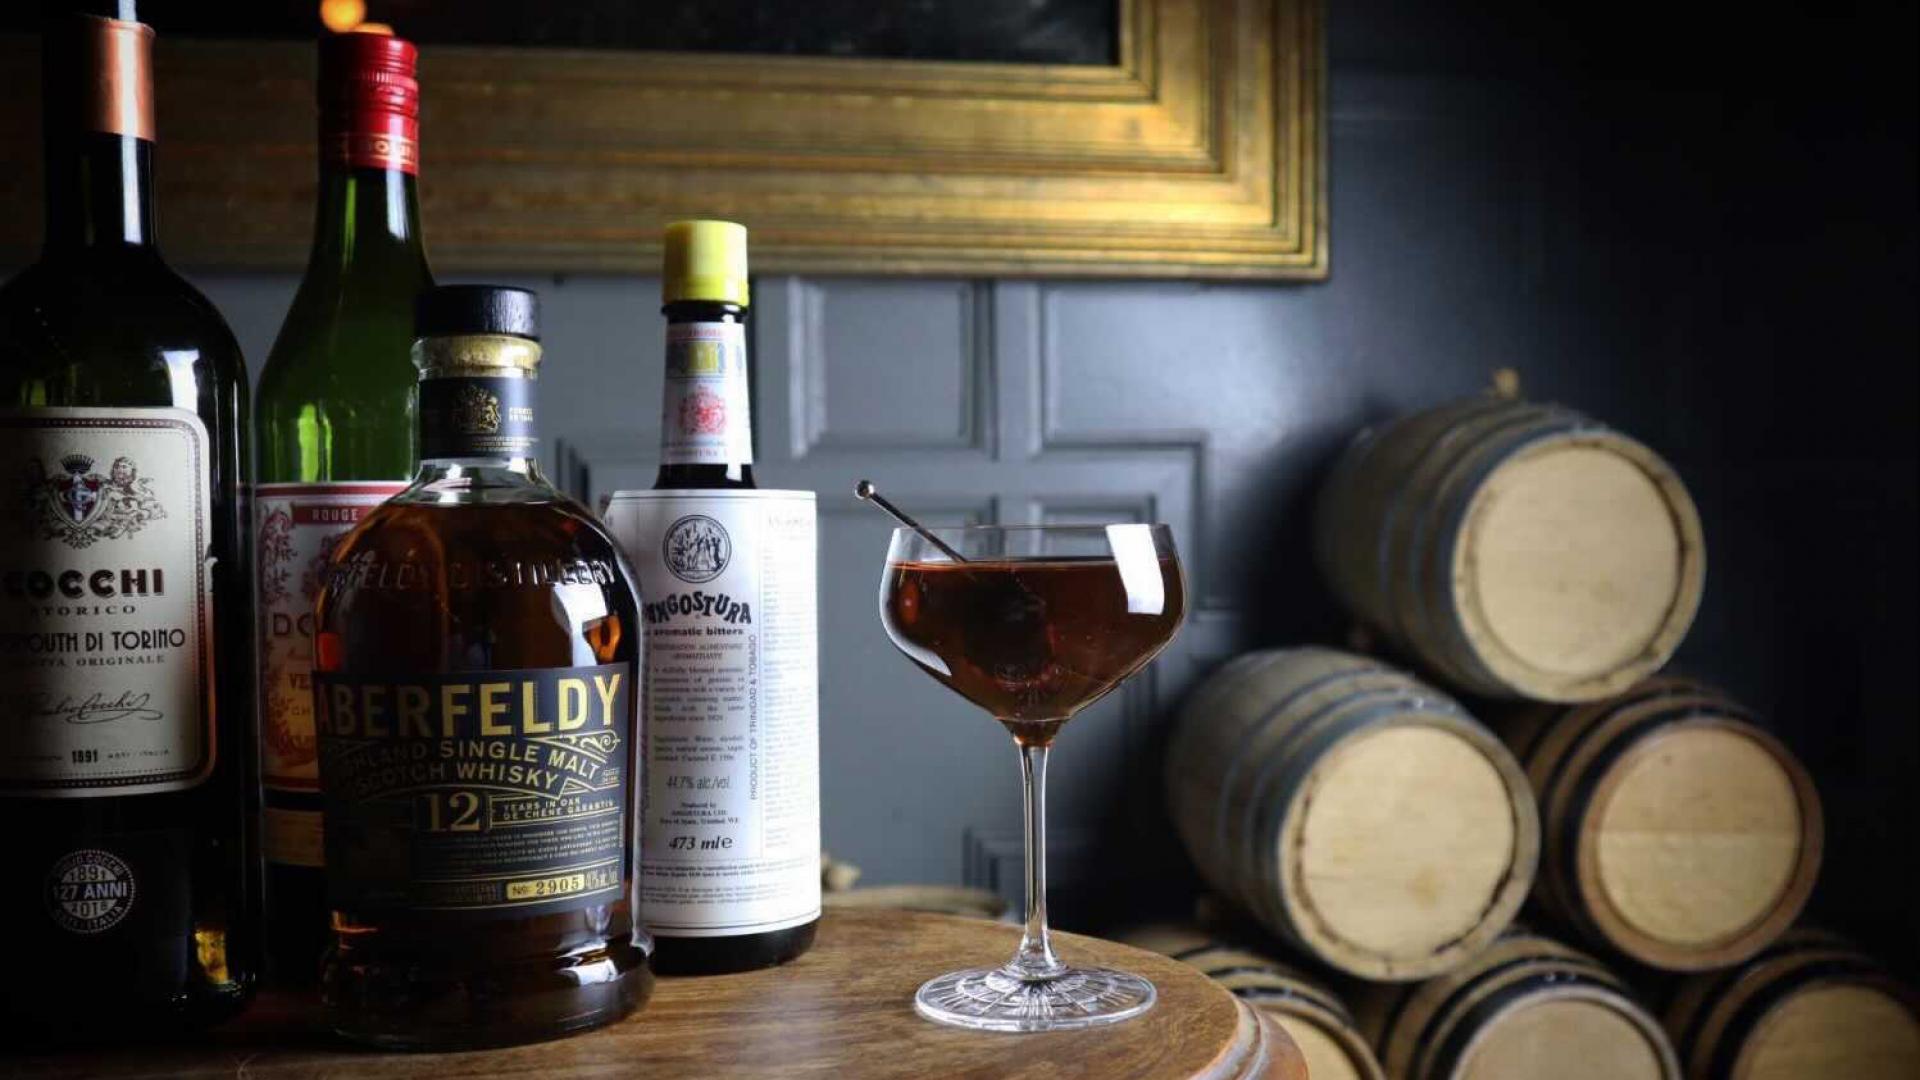 Father's Day dinners and Father's Day gifts | The Rob Roy barrel from The Cloak Bar